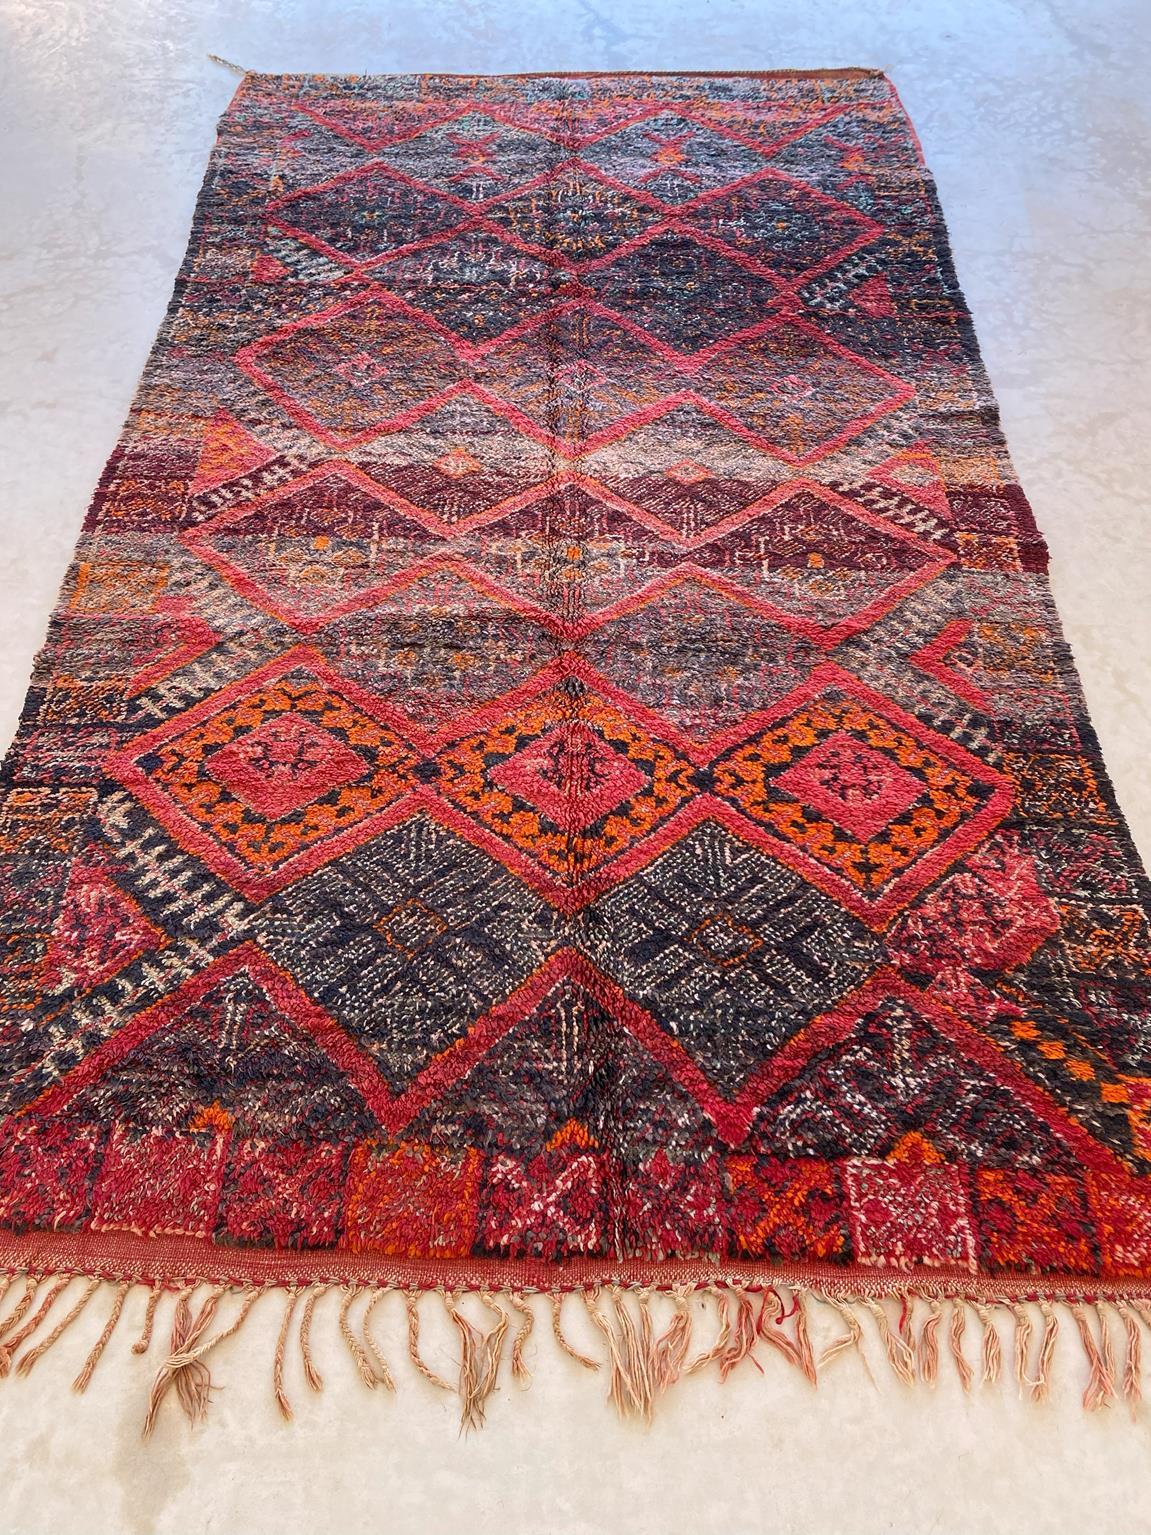 20th Century Vintage Moroccan Beni Mguild rug - Black/red - 6x10.8feet / 183x331cm For Sale